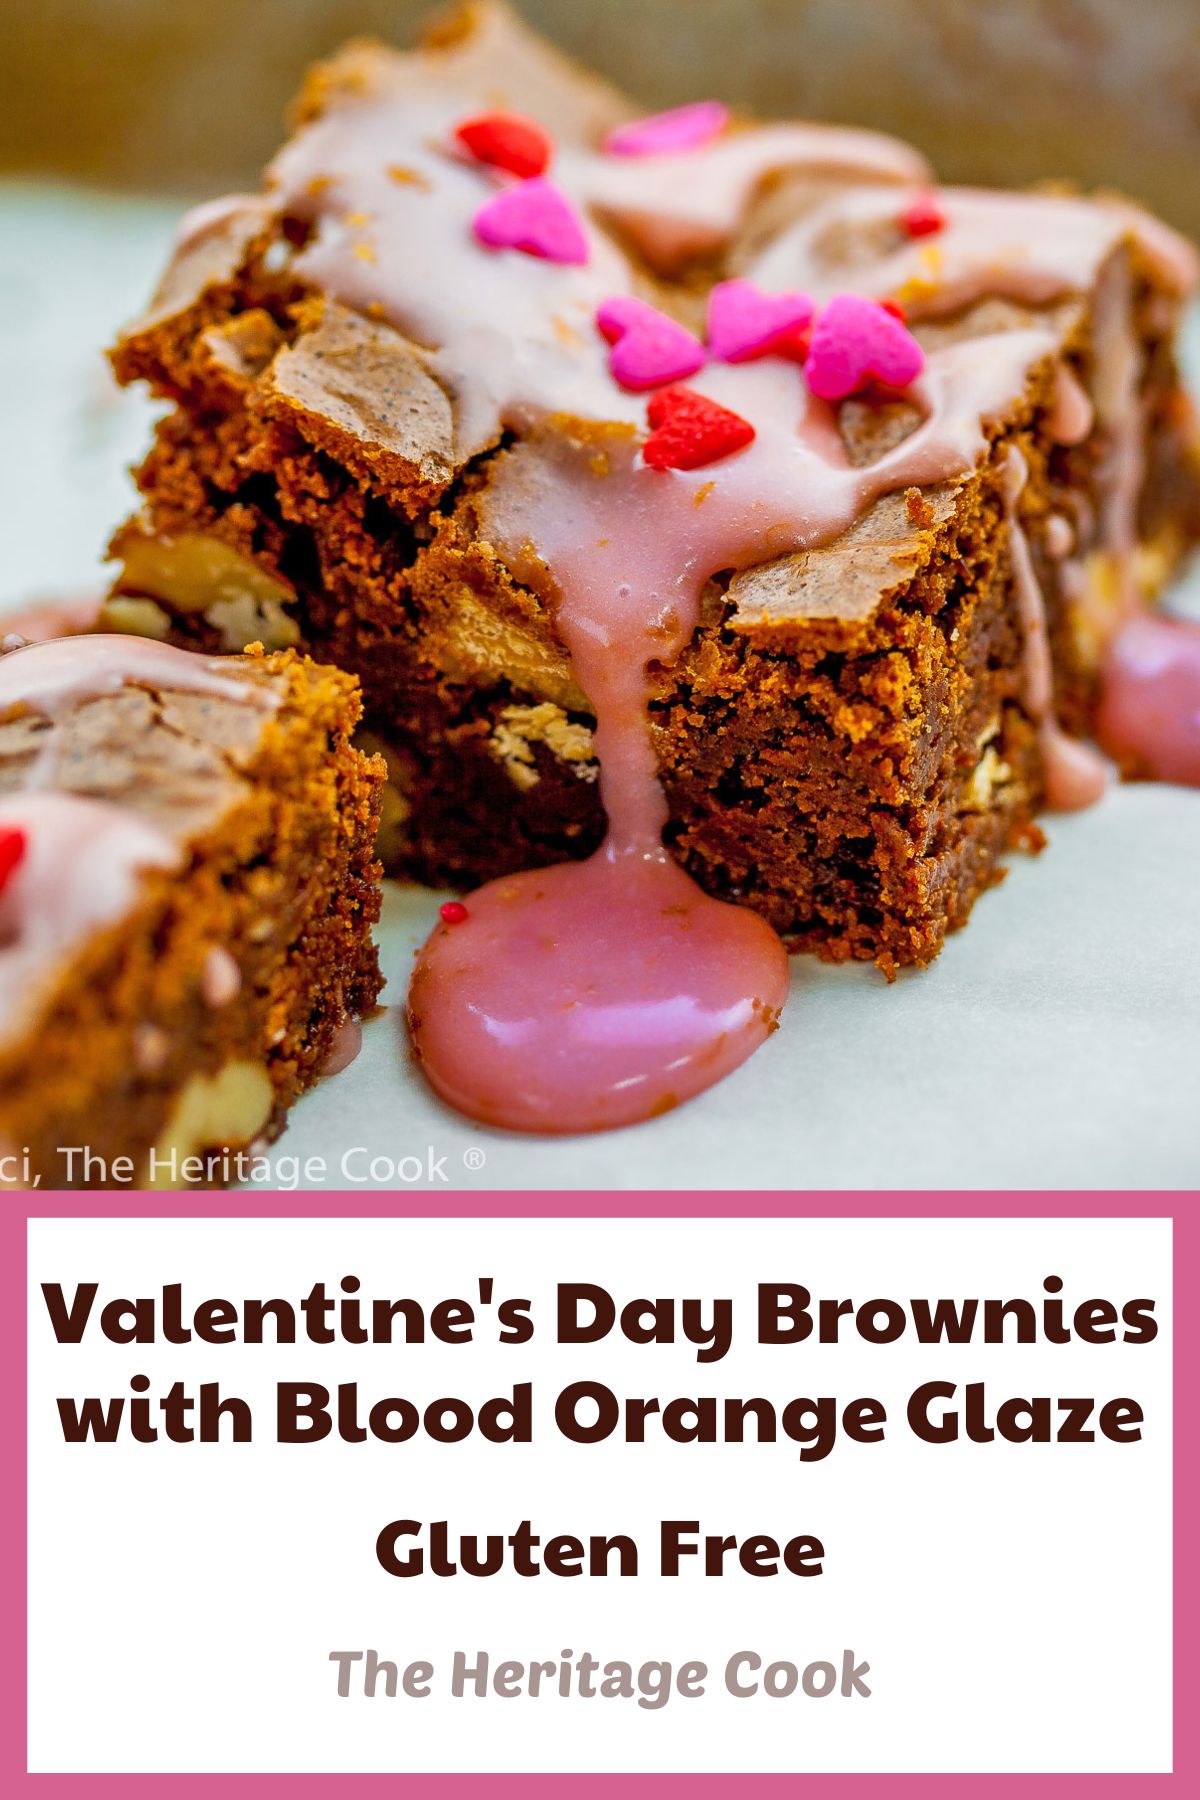 Brownies drizzled with orange glaze and sprinkled with red and pink decorations for Valentine’s Day; Valentine’s Day Brownies with Orange Glaze © 2023 Jane Bonacci, The Heritage Cook.